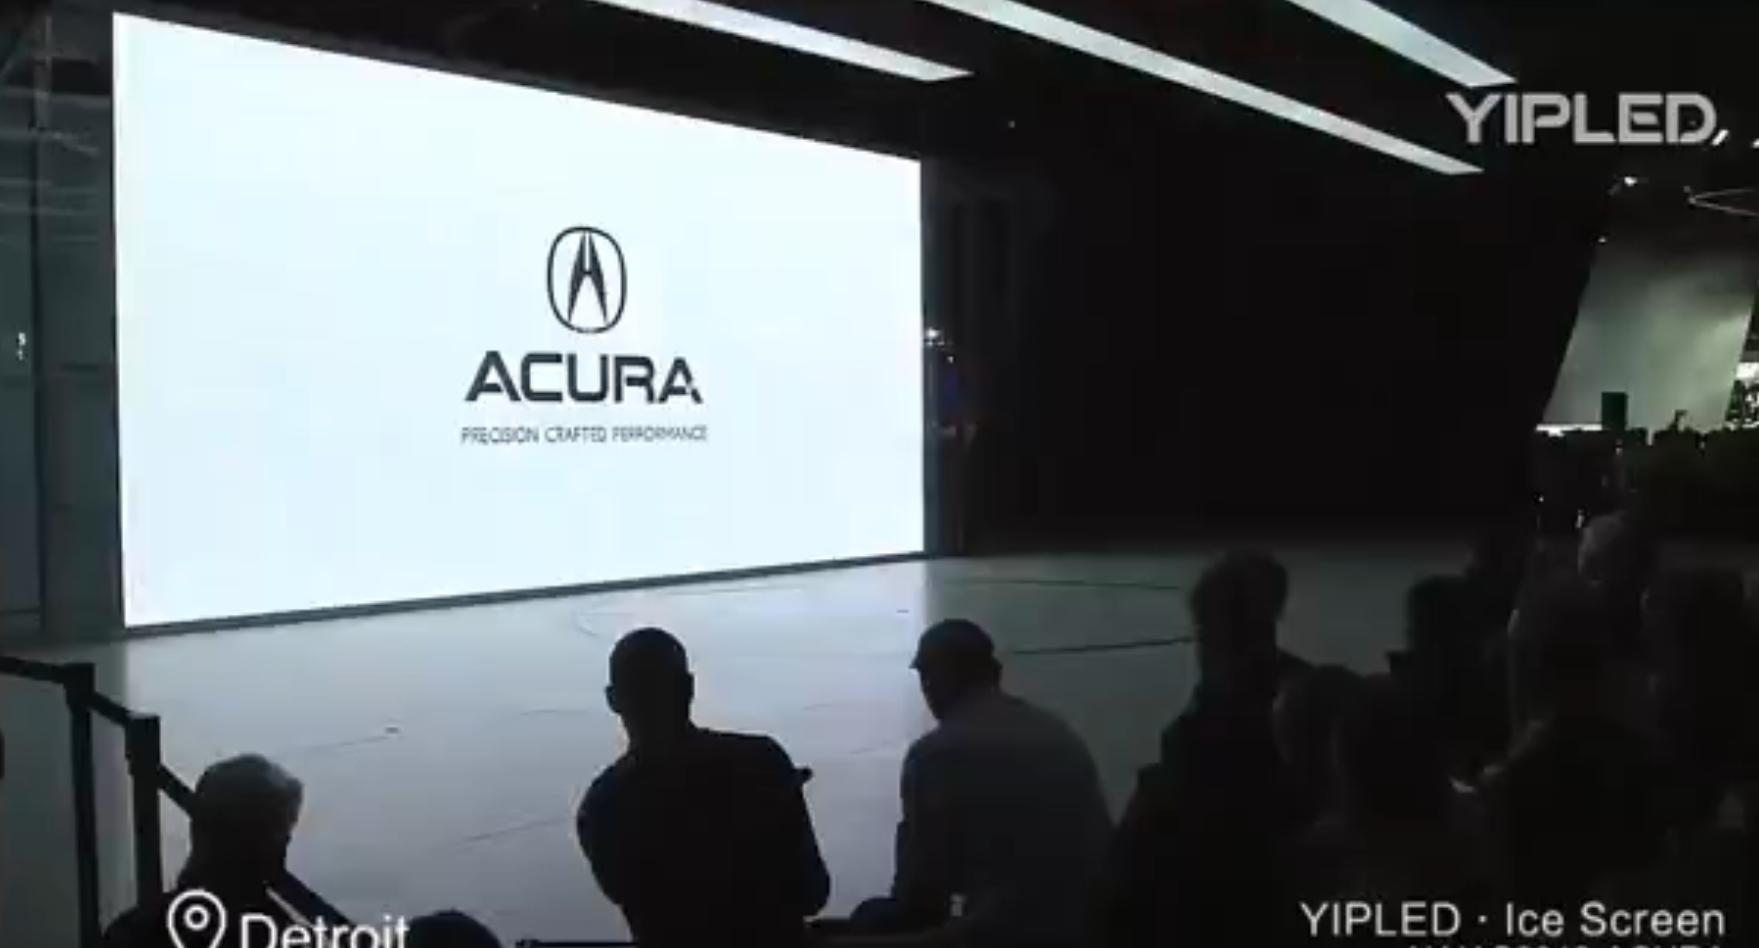 ​YIPLED's Ice Screen Appeared at the Launch Conference of Acura (high-end Brand of Luxury Cars Owned